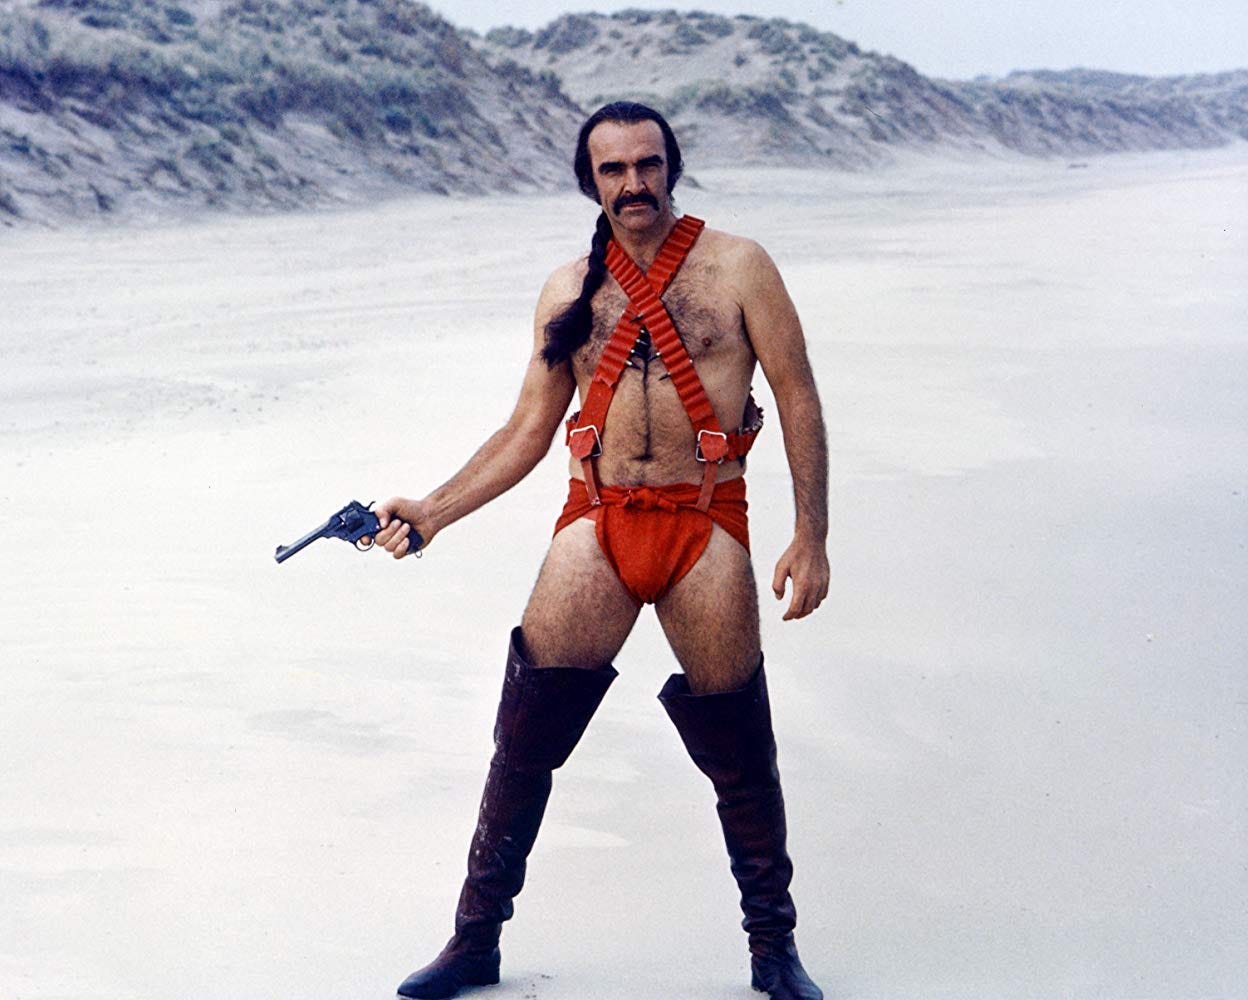 Chubby Nudists - Zardoz Explained. Let us meditate upon these truths atâ€¦ | by Scott  Clevenger | Medium